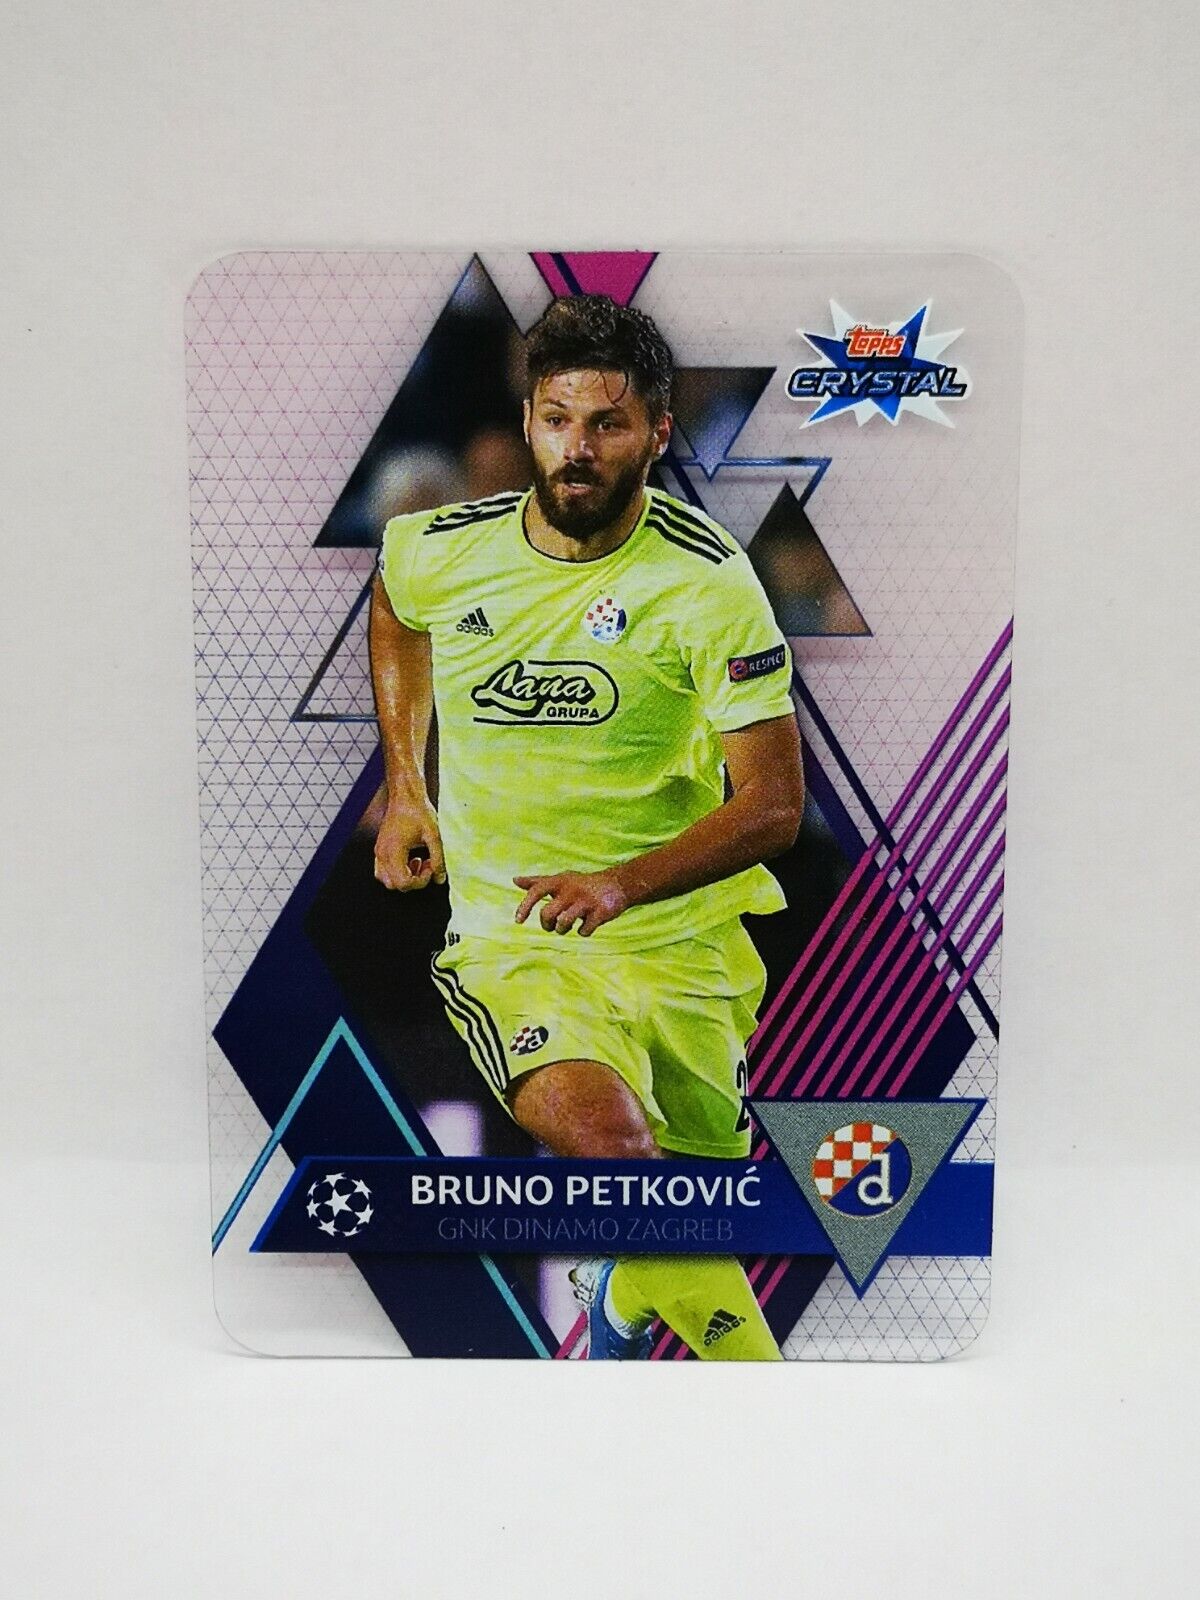 2019 Topps Crystal 2019 Champions League ZAGREB 65 PETKOVIC Card